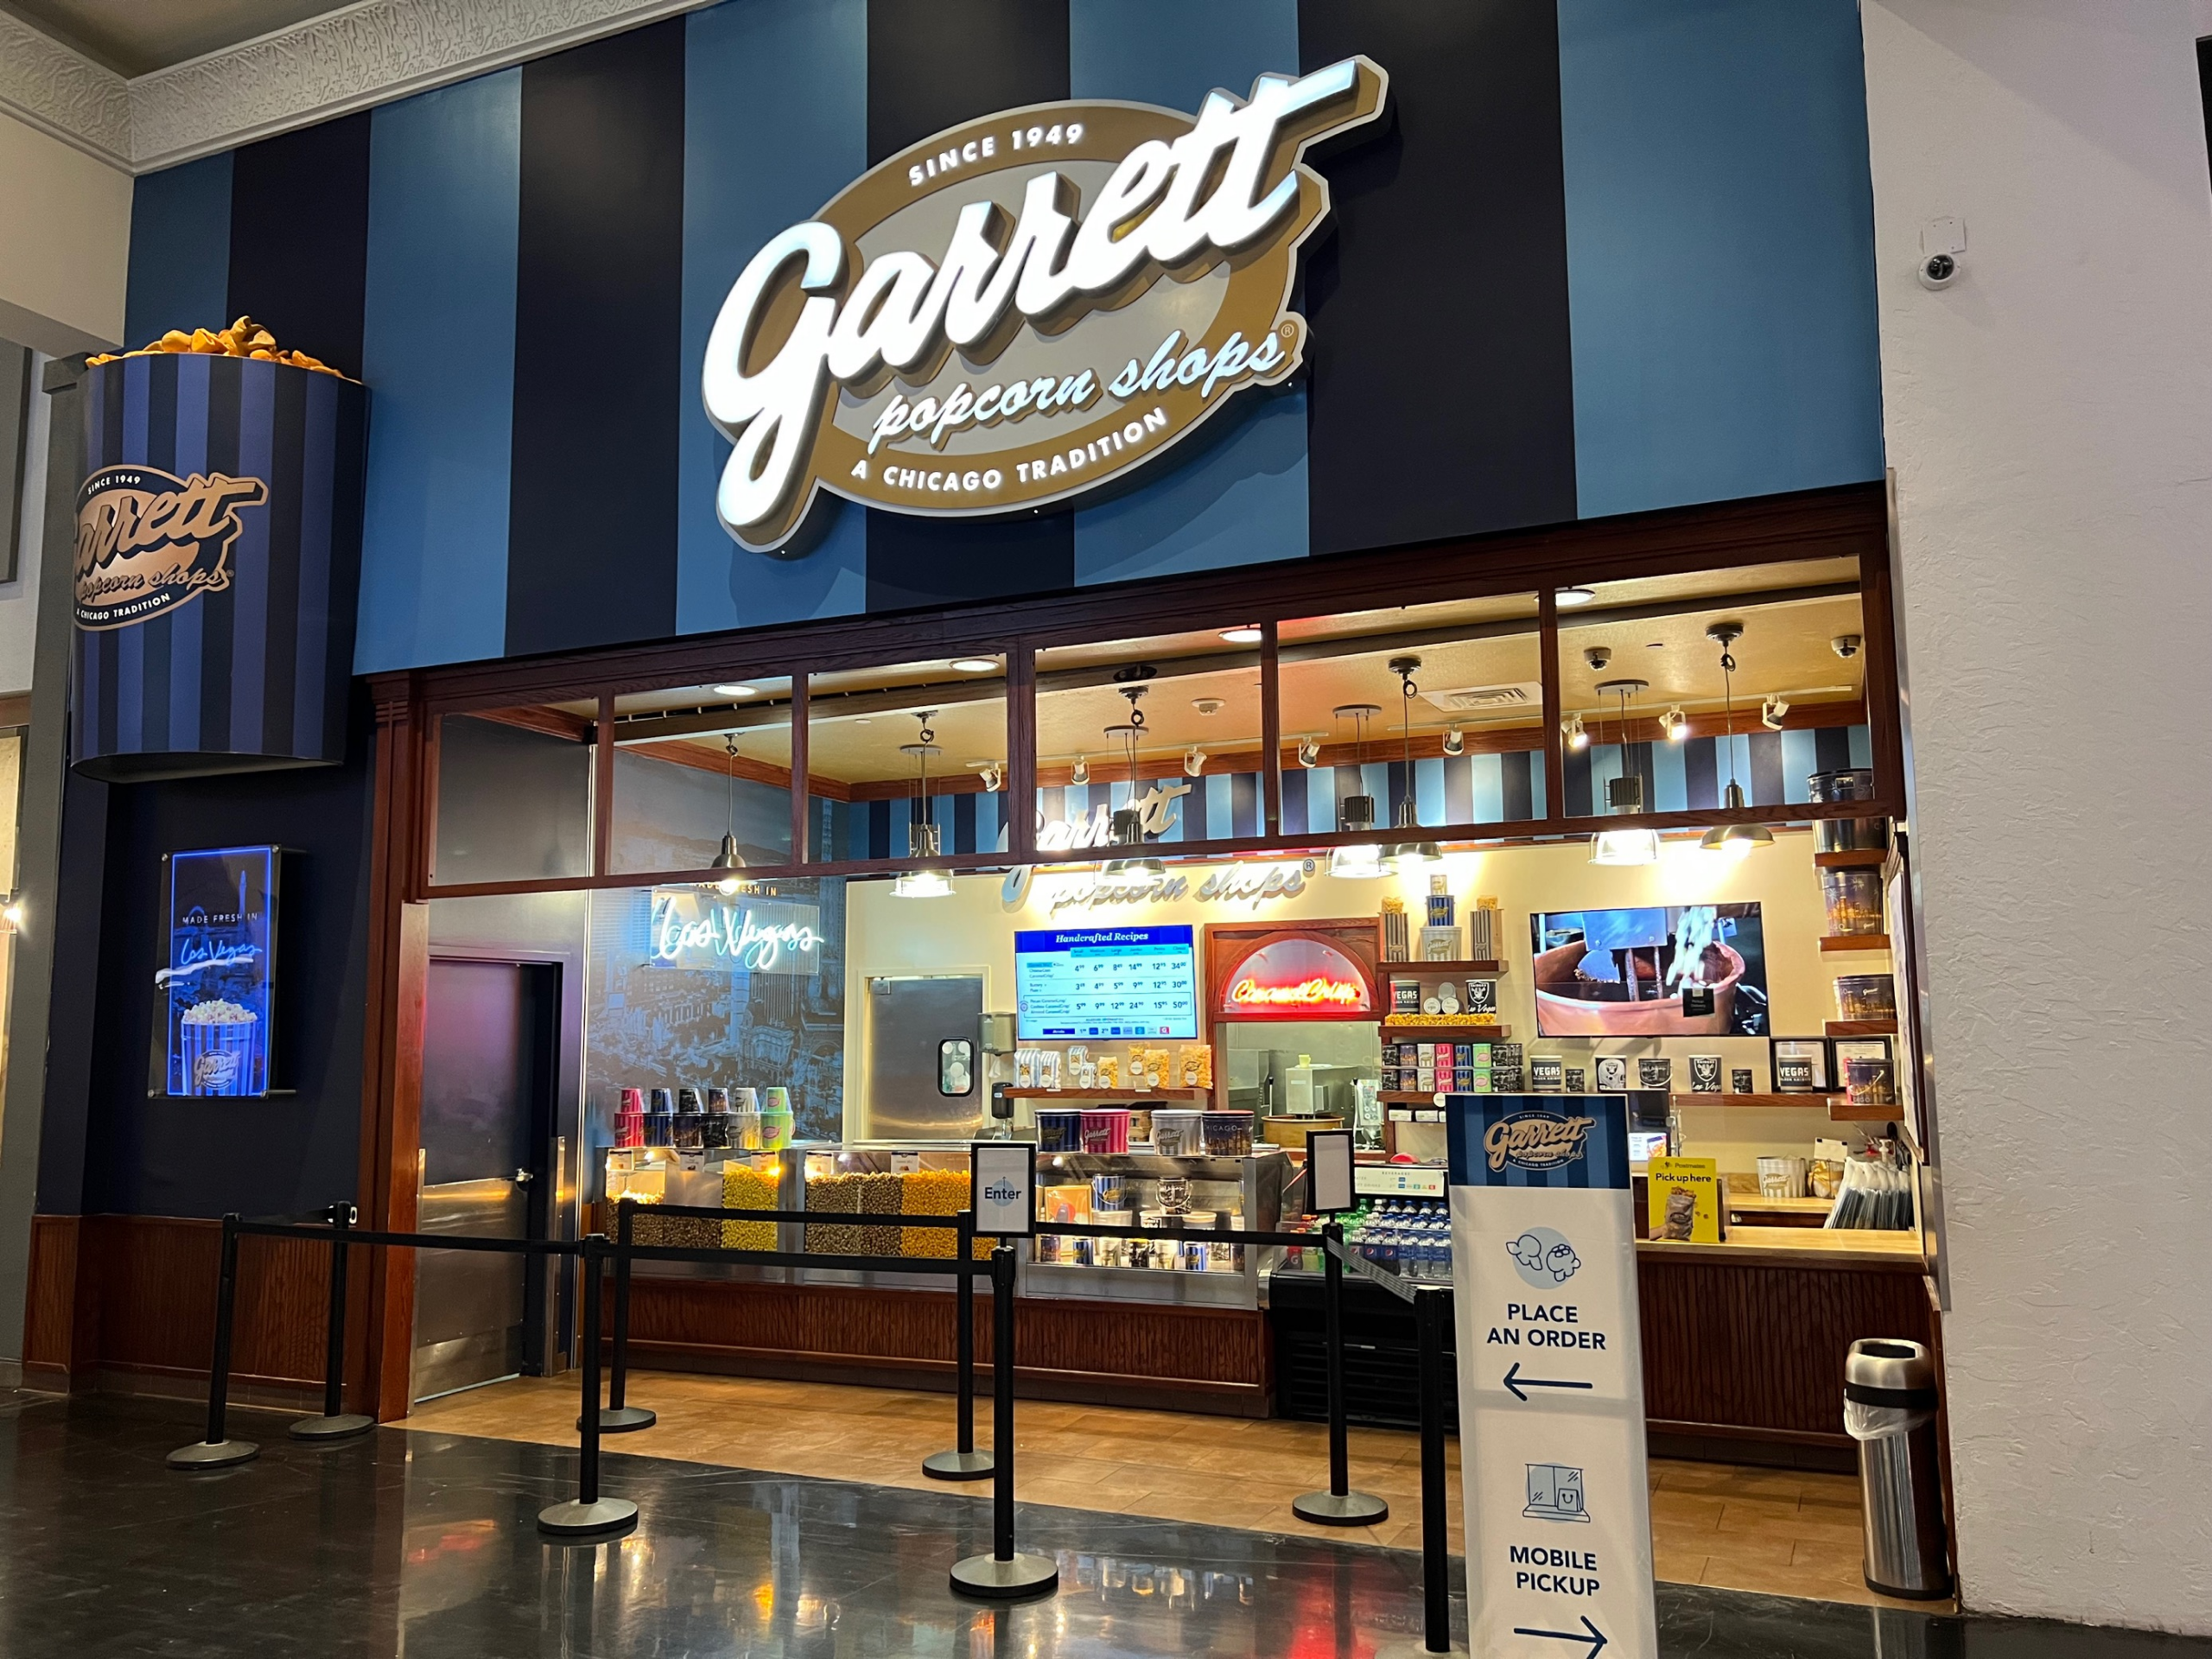 Entrance to Garrett Popcorn Shops located inside of Miracle Mile Shops